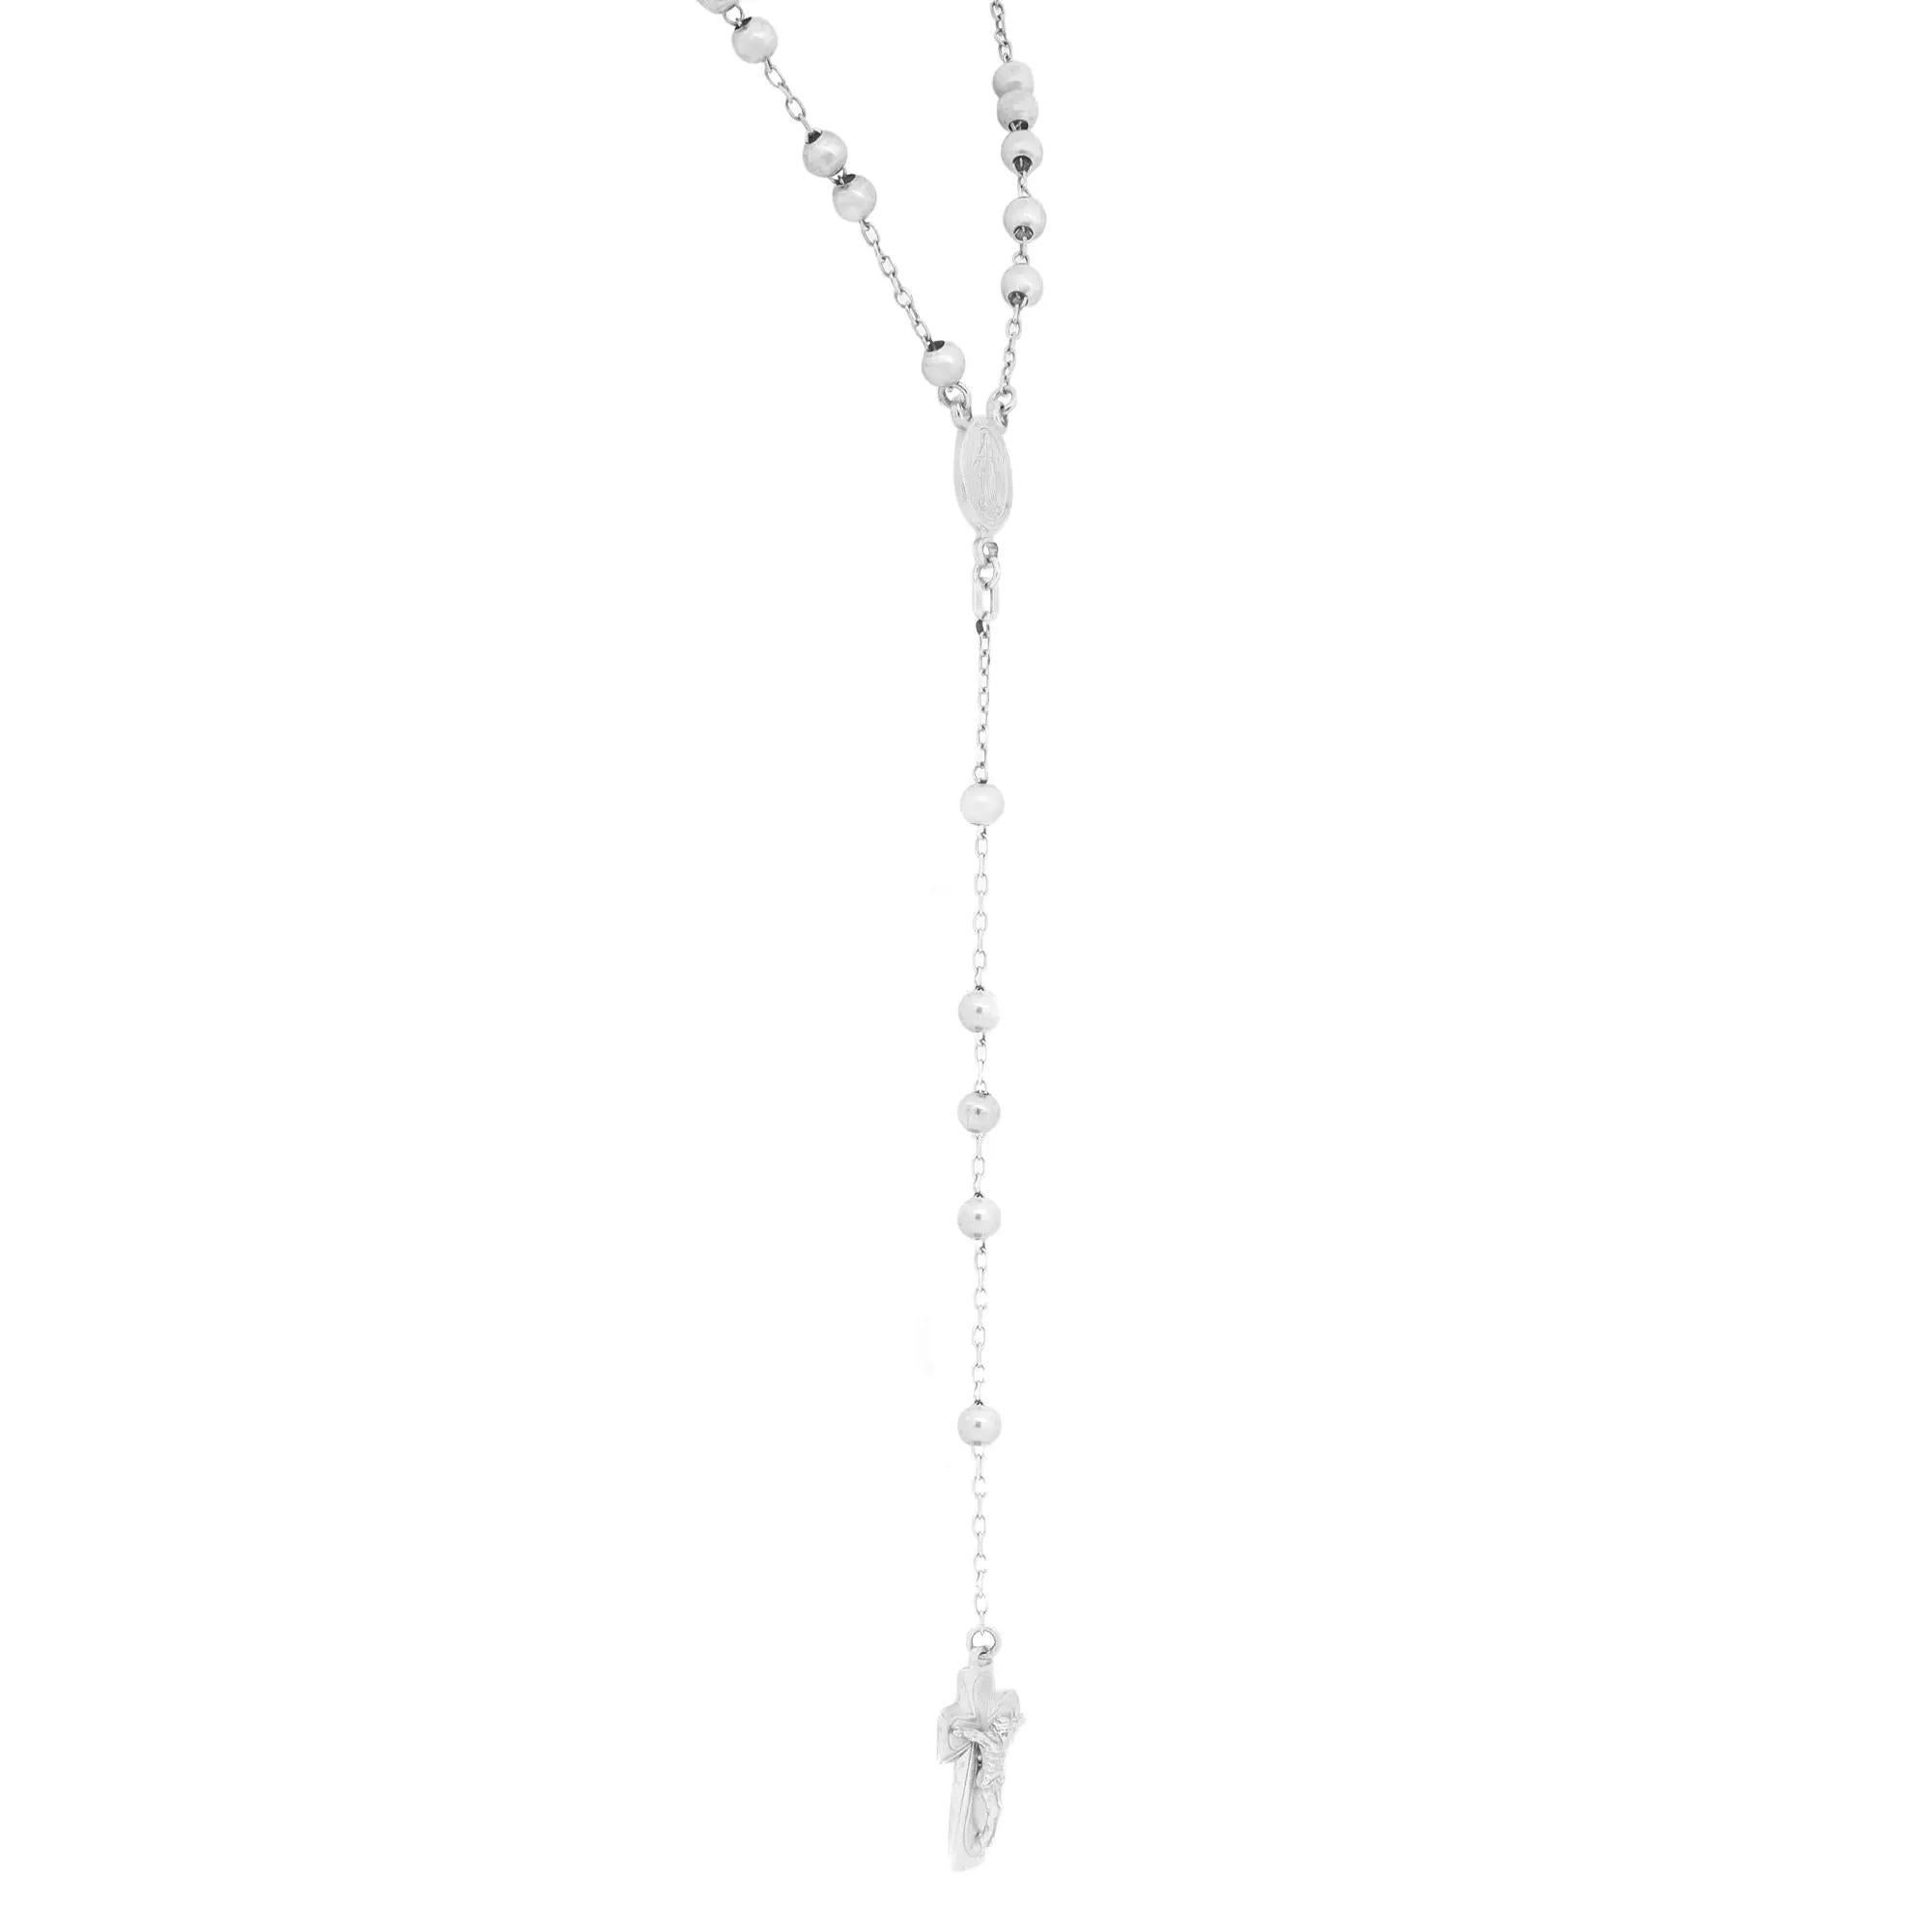 A statement of faith, this rosary inspired beaded necklace features a medallion of the blessed virgin and a powerful cross. Crafted in lustrous 14K white gold. Chain length: 24 inches. Cross size: 21.4mm x 12.1mm. Total weight: 14.00 grams. Comes